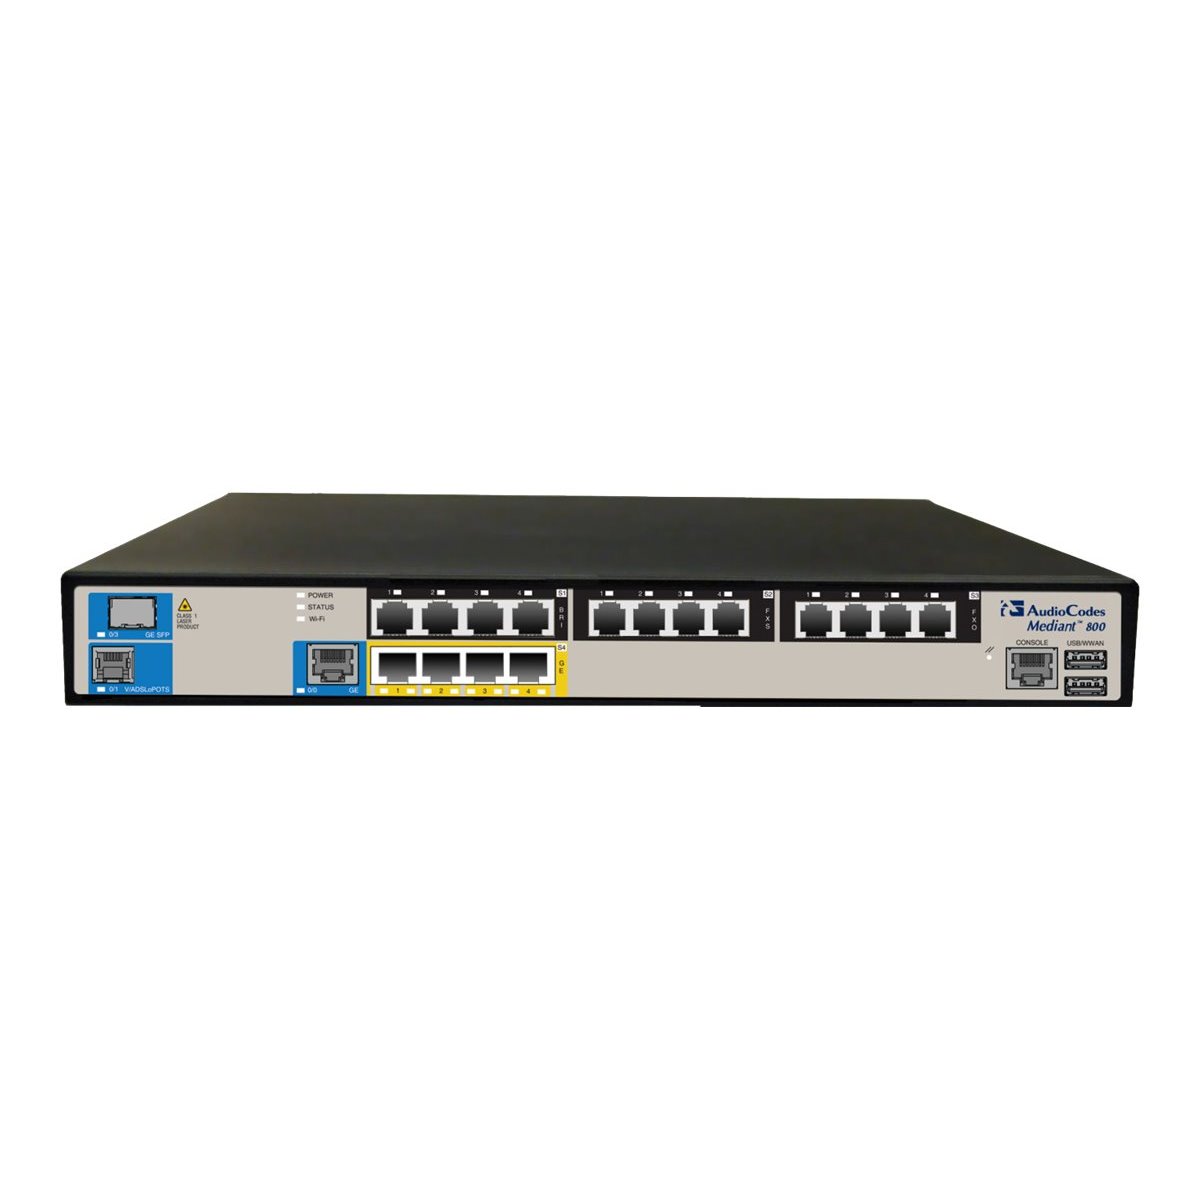 AudioCodes Mediant 800B with 2 E1-T1 and 4 FXS - VOIP